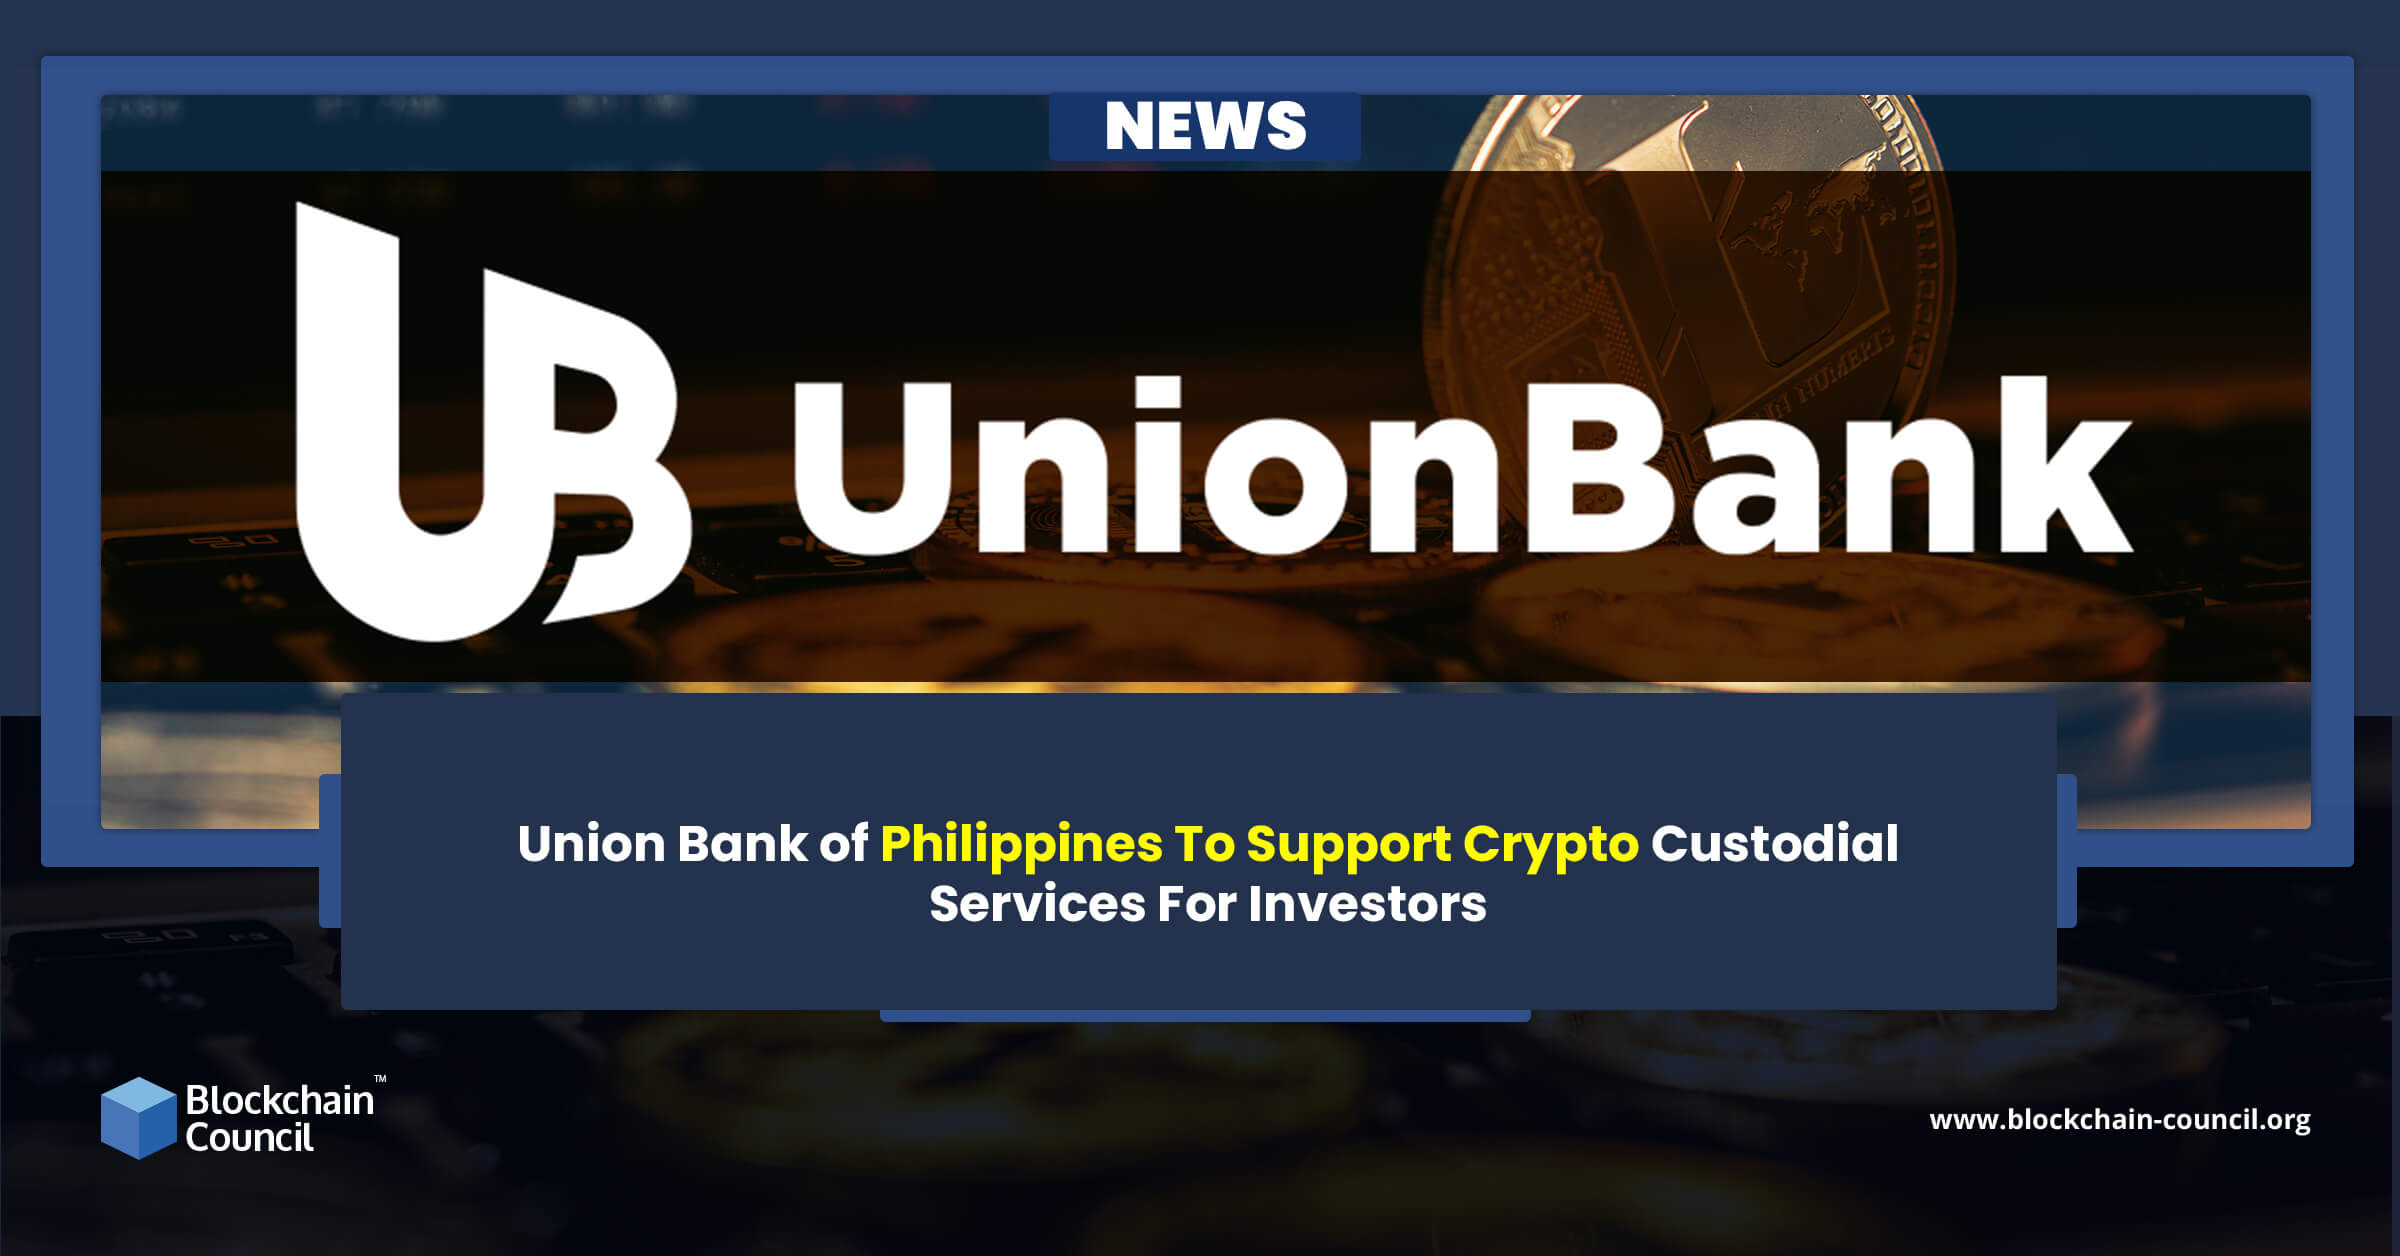 Union Bank of Philippines To Support Crypto Custodial Services For Investors